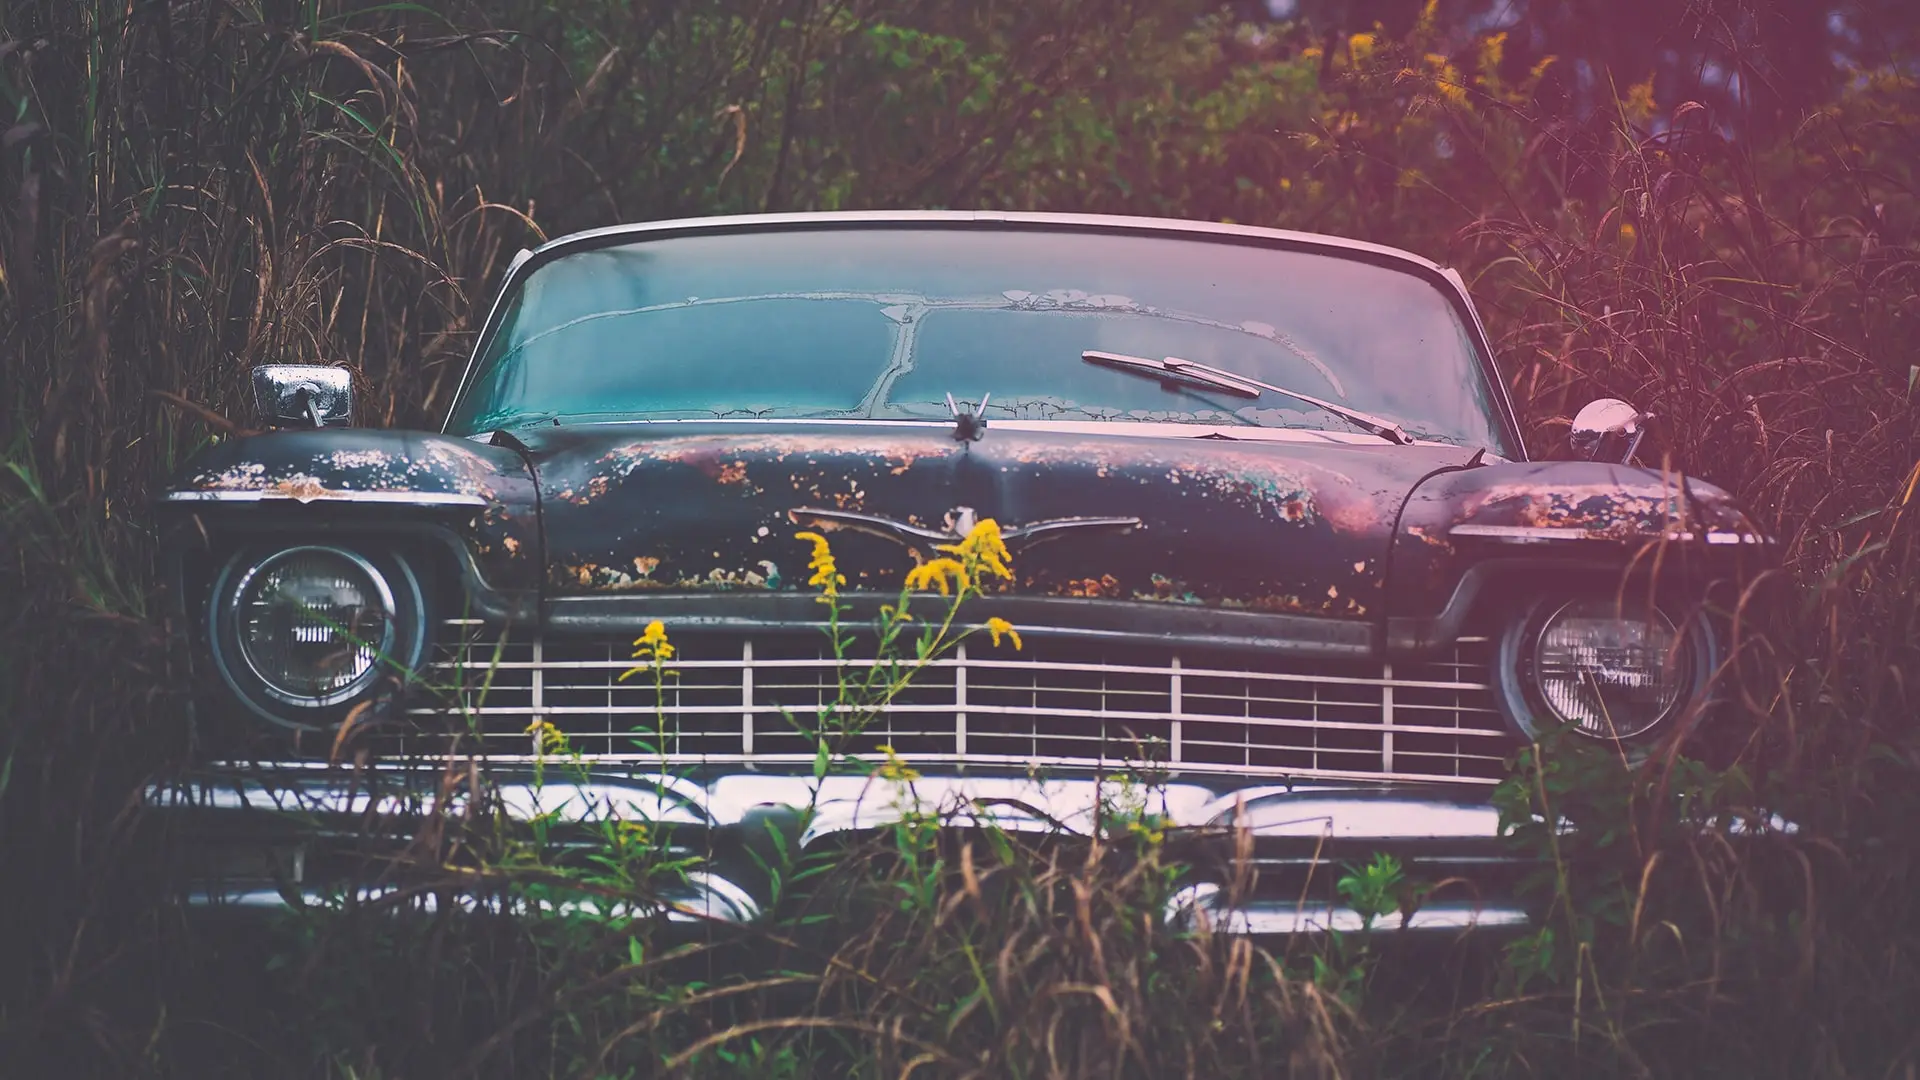 old car in field with grass around it